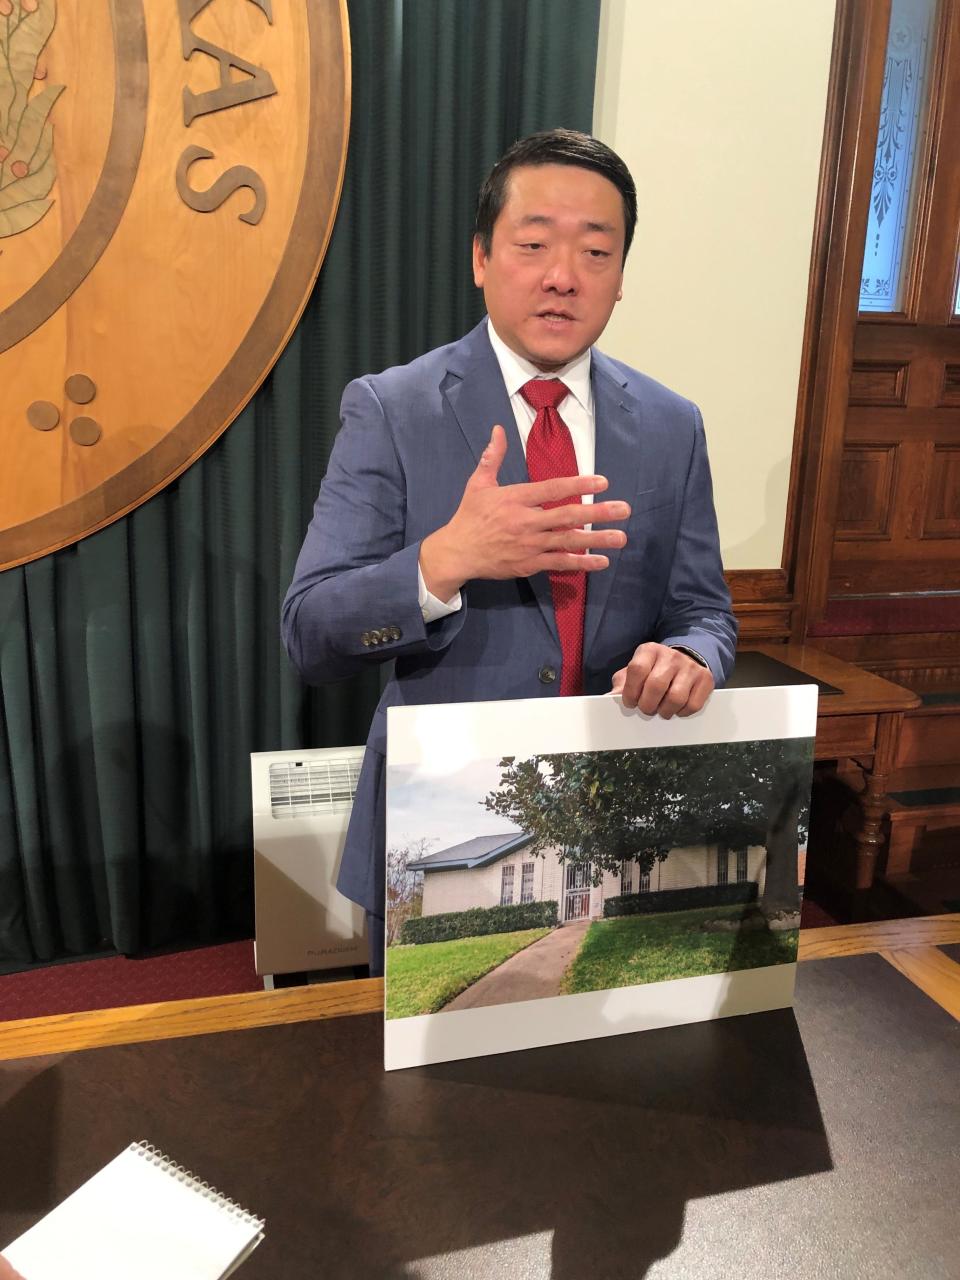 State Rep. Gene Wu with a photo of the house in Houston his parents purchased while going through the process of becoming U.S. citizens.